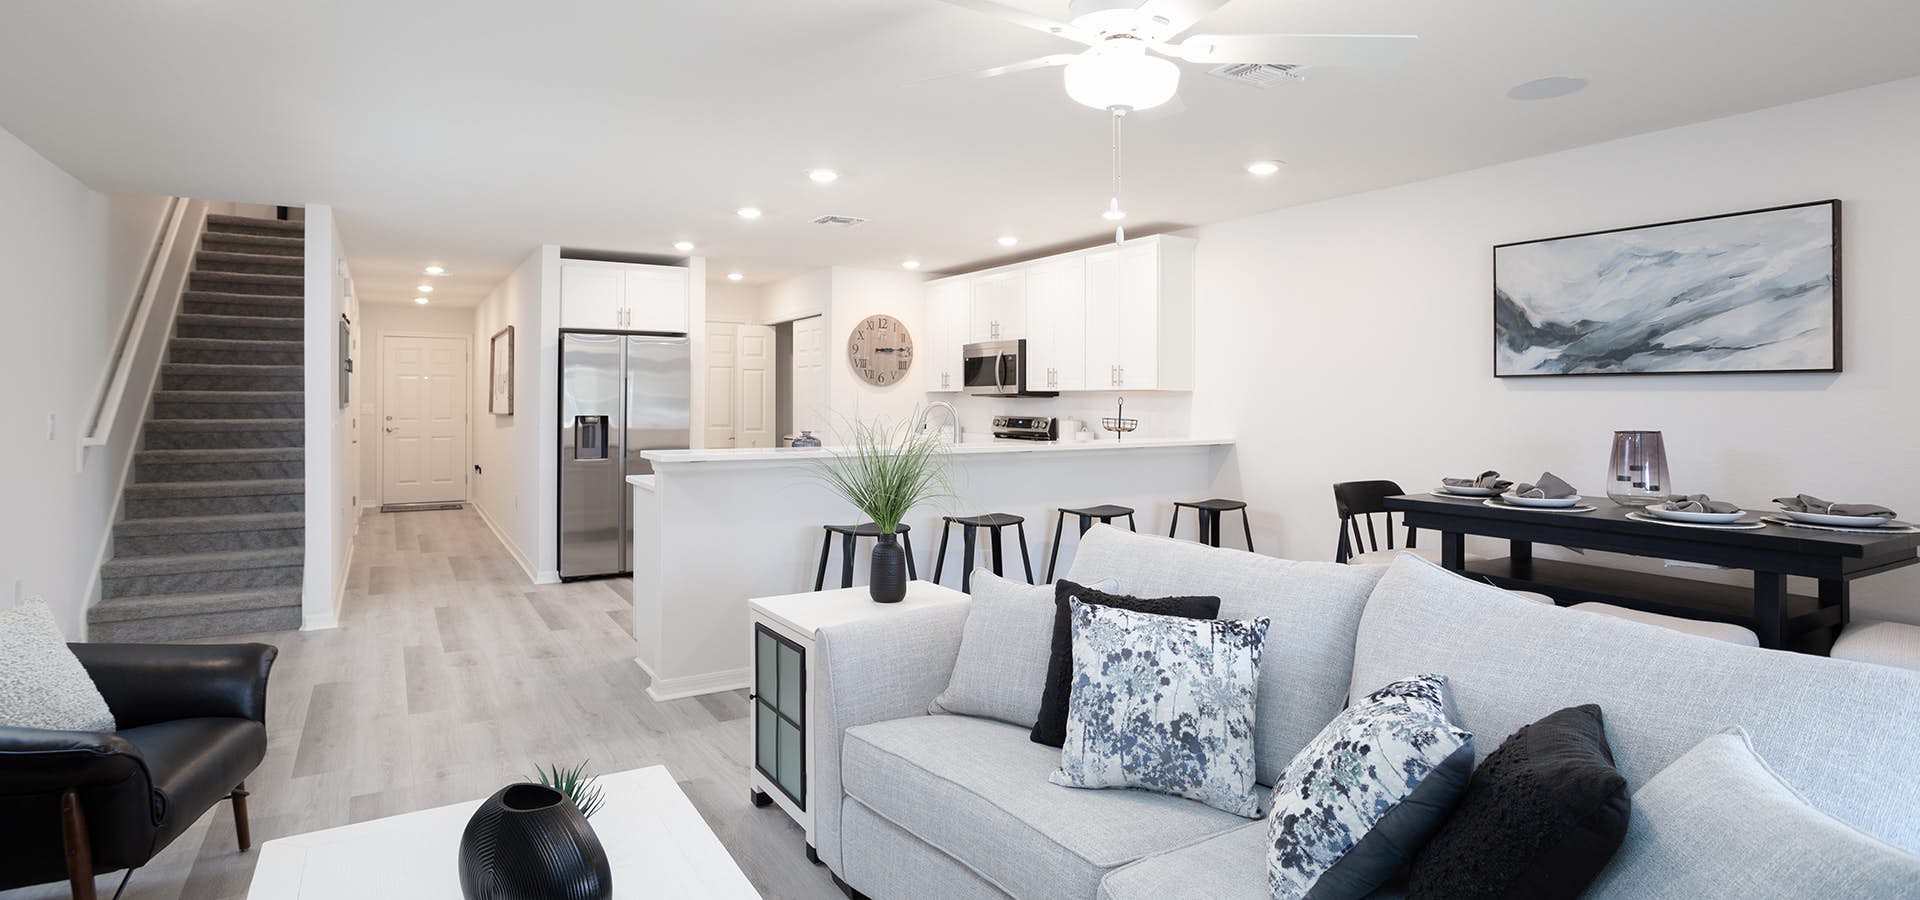 Open living area and kitchen with white cabinets and breakfast bar